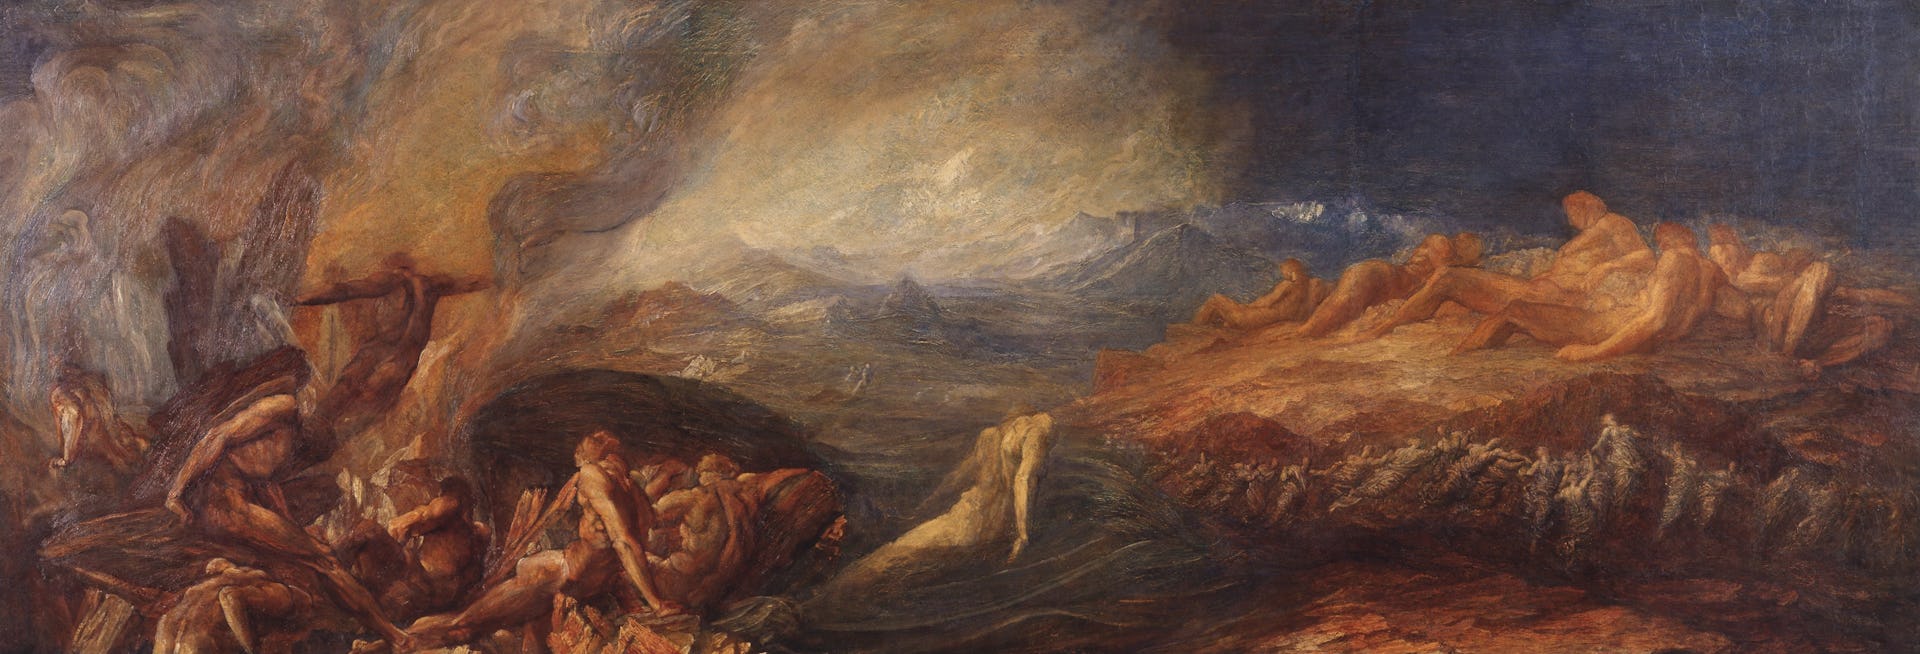 Chaos by George Frederic Watts and Assistants (ca. 1875)